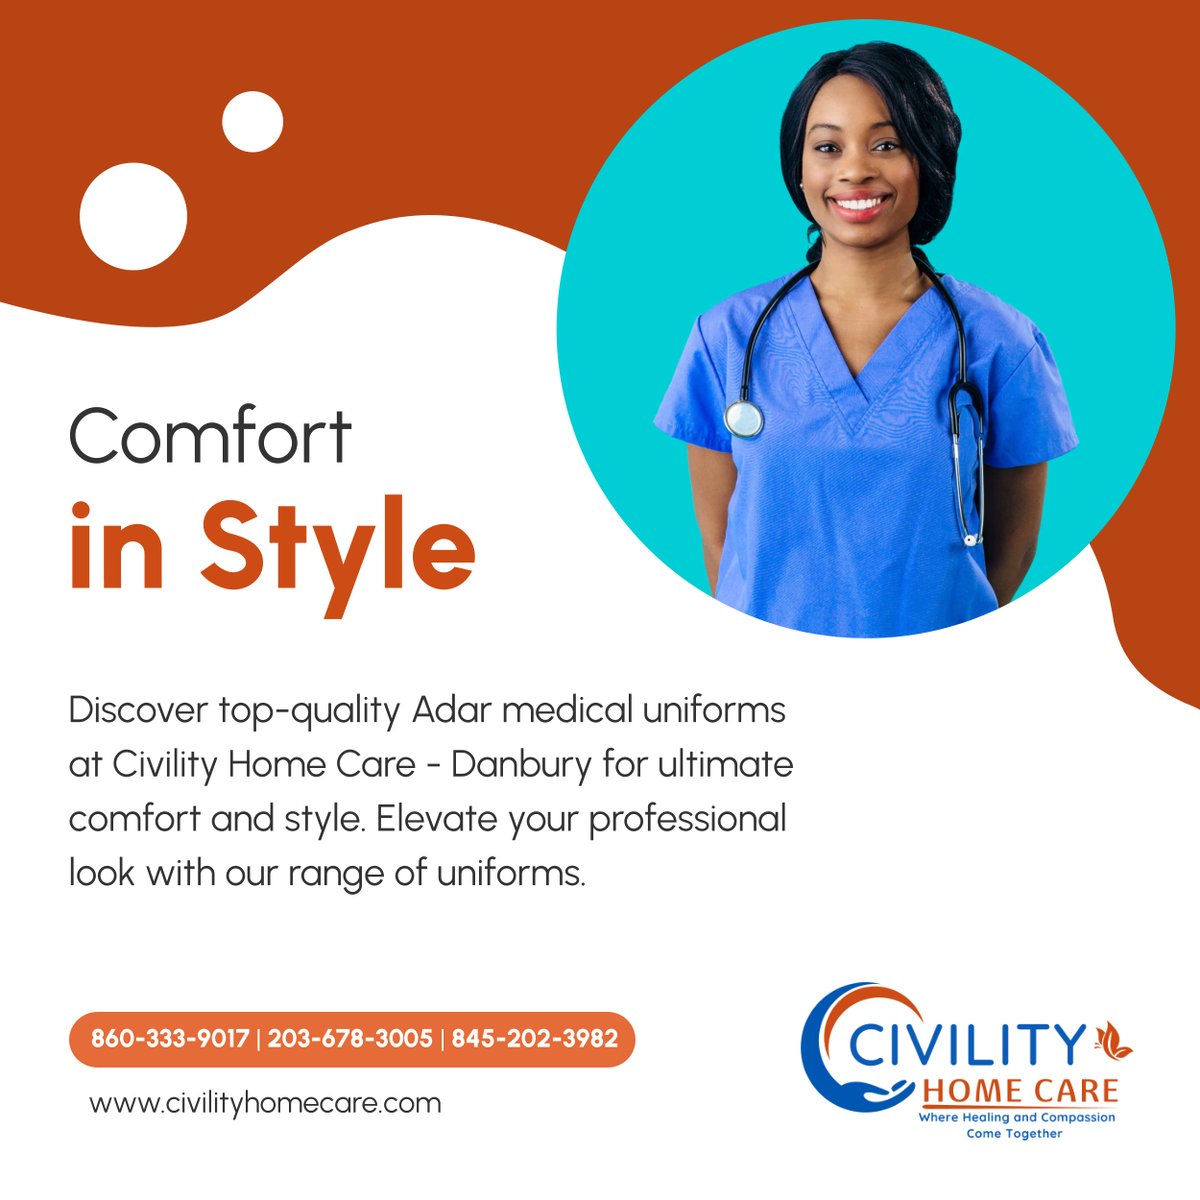 Elevate your professional style with Adar medical uniforms from Civility Home Care - Danbury. 

Stay comfortable and fashionable while serving your patients' needs. 

#MedicalUniforms #HealthcareFashion #BrewsterNY #HomeCareAndMedicalSupplies #Scrubs